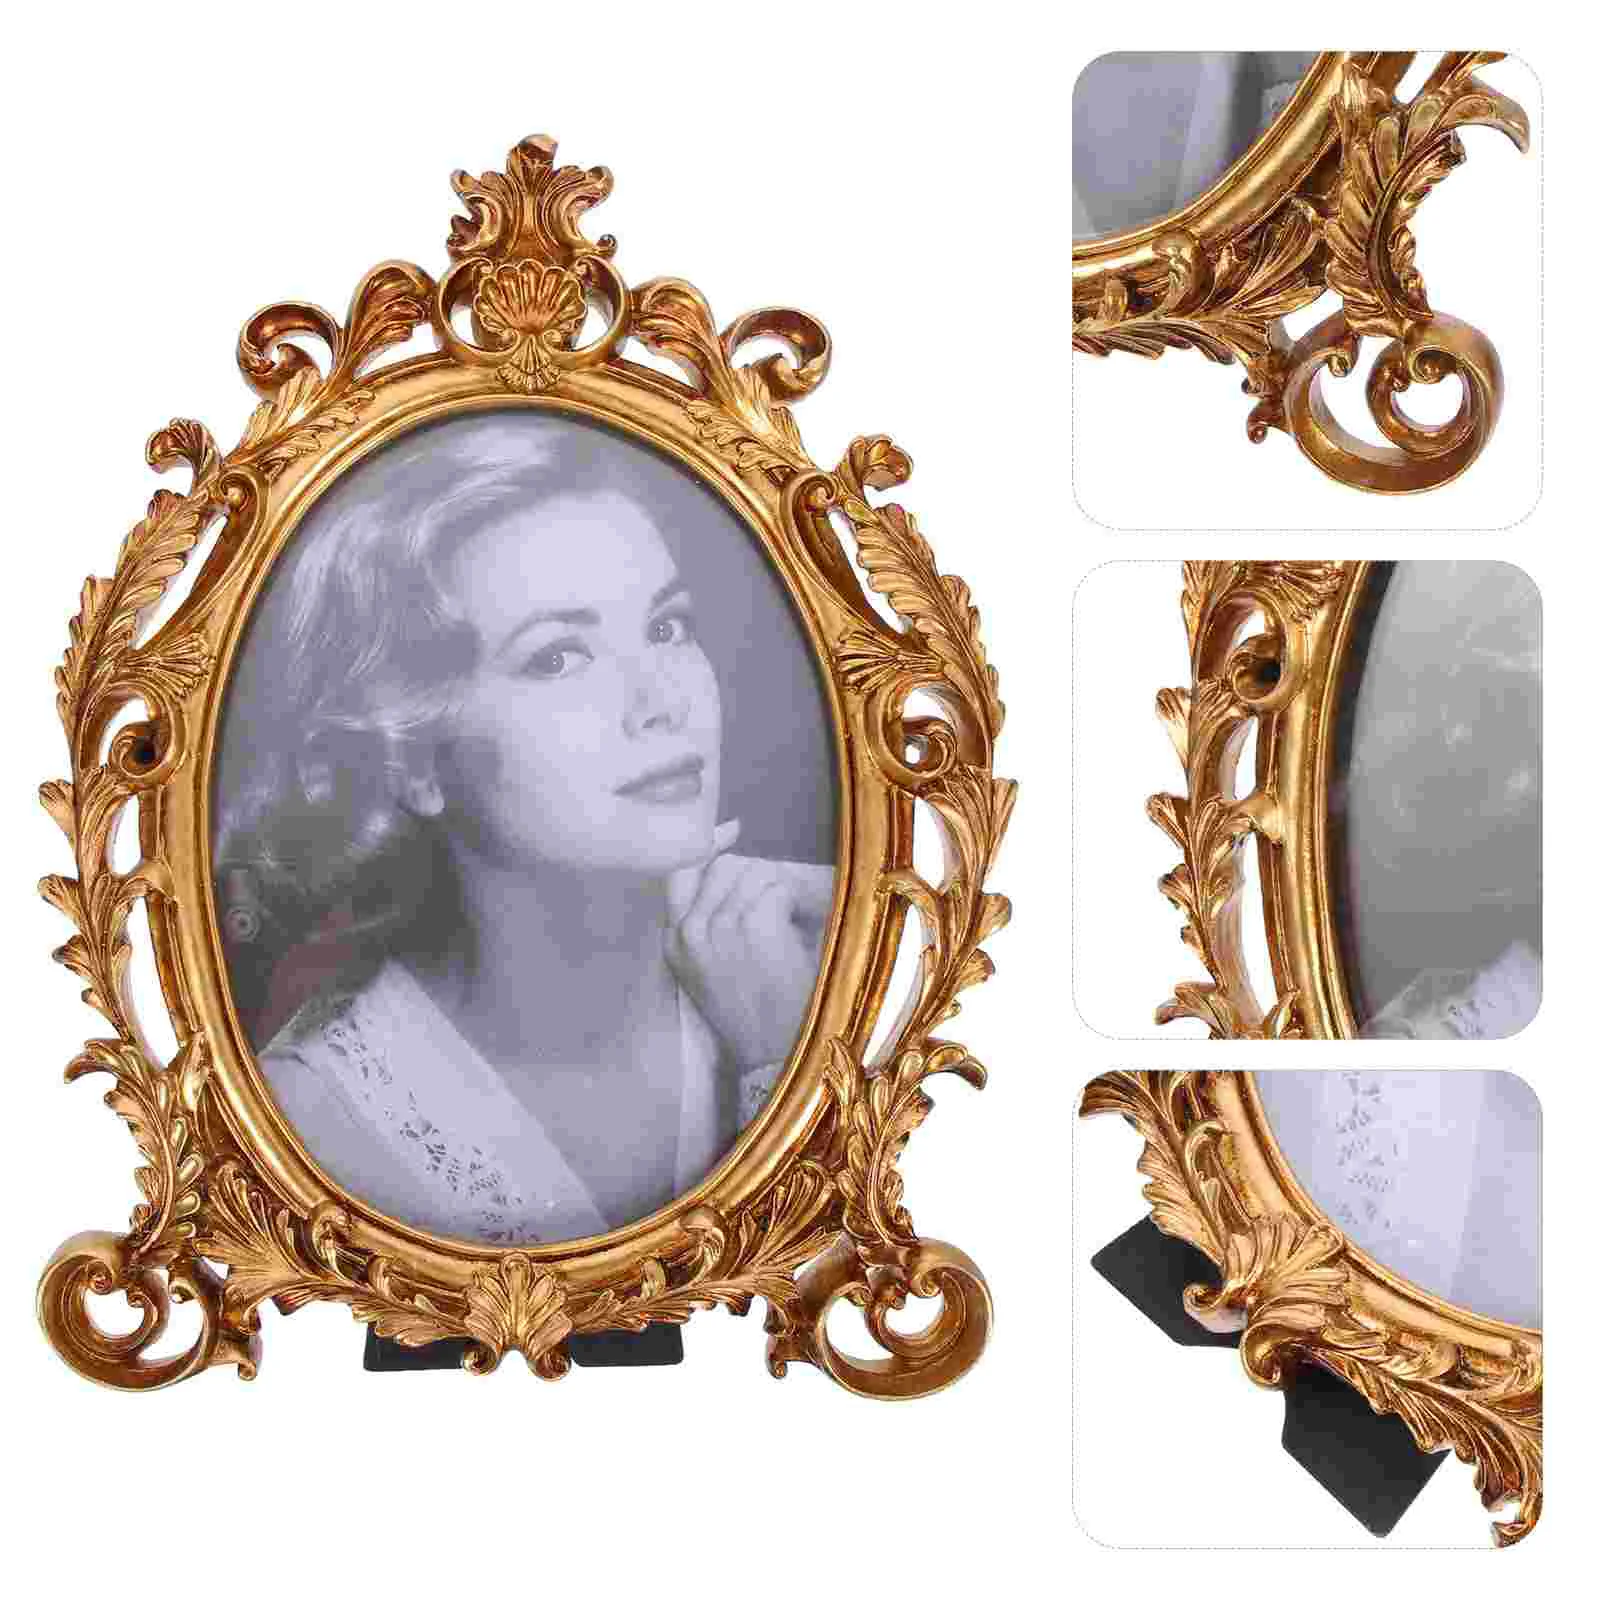 

Vintage Baroque Oval Photo Frame Table Picture Frame Ornate Photo Display Holder for European Style Home Table Decor 8 Golden